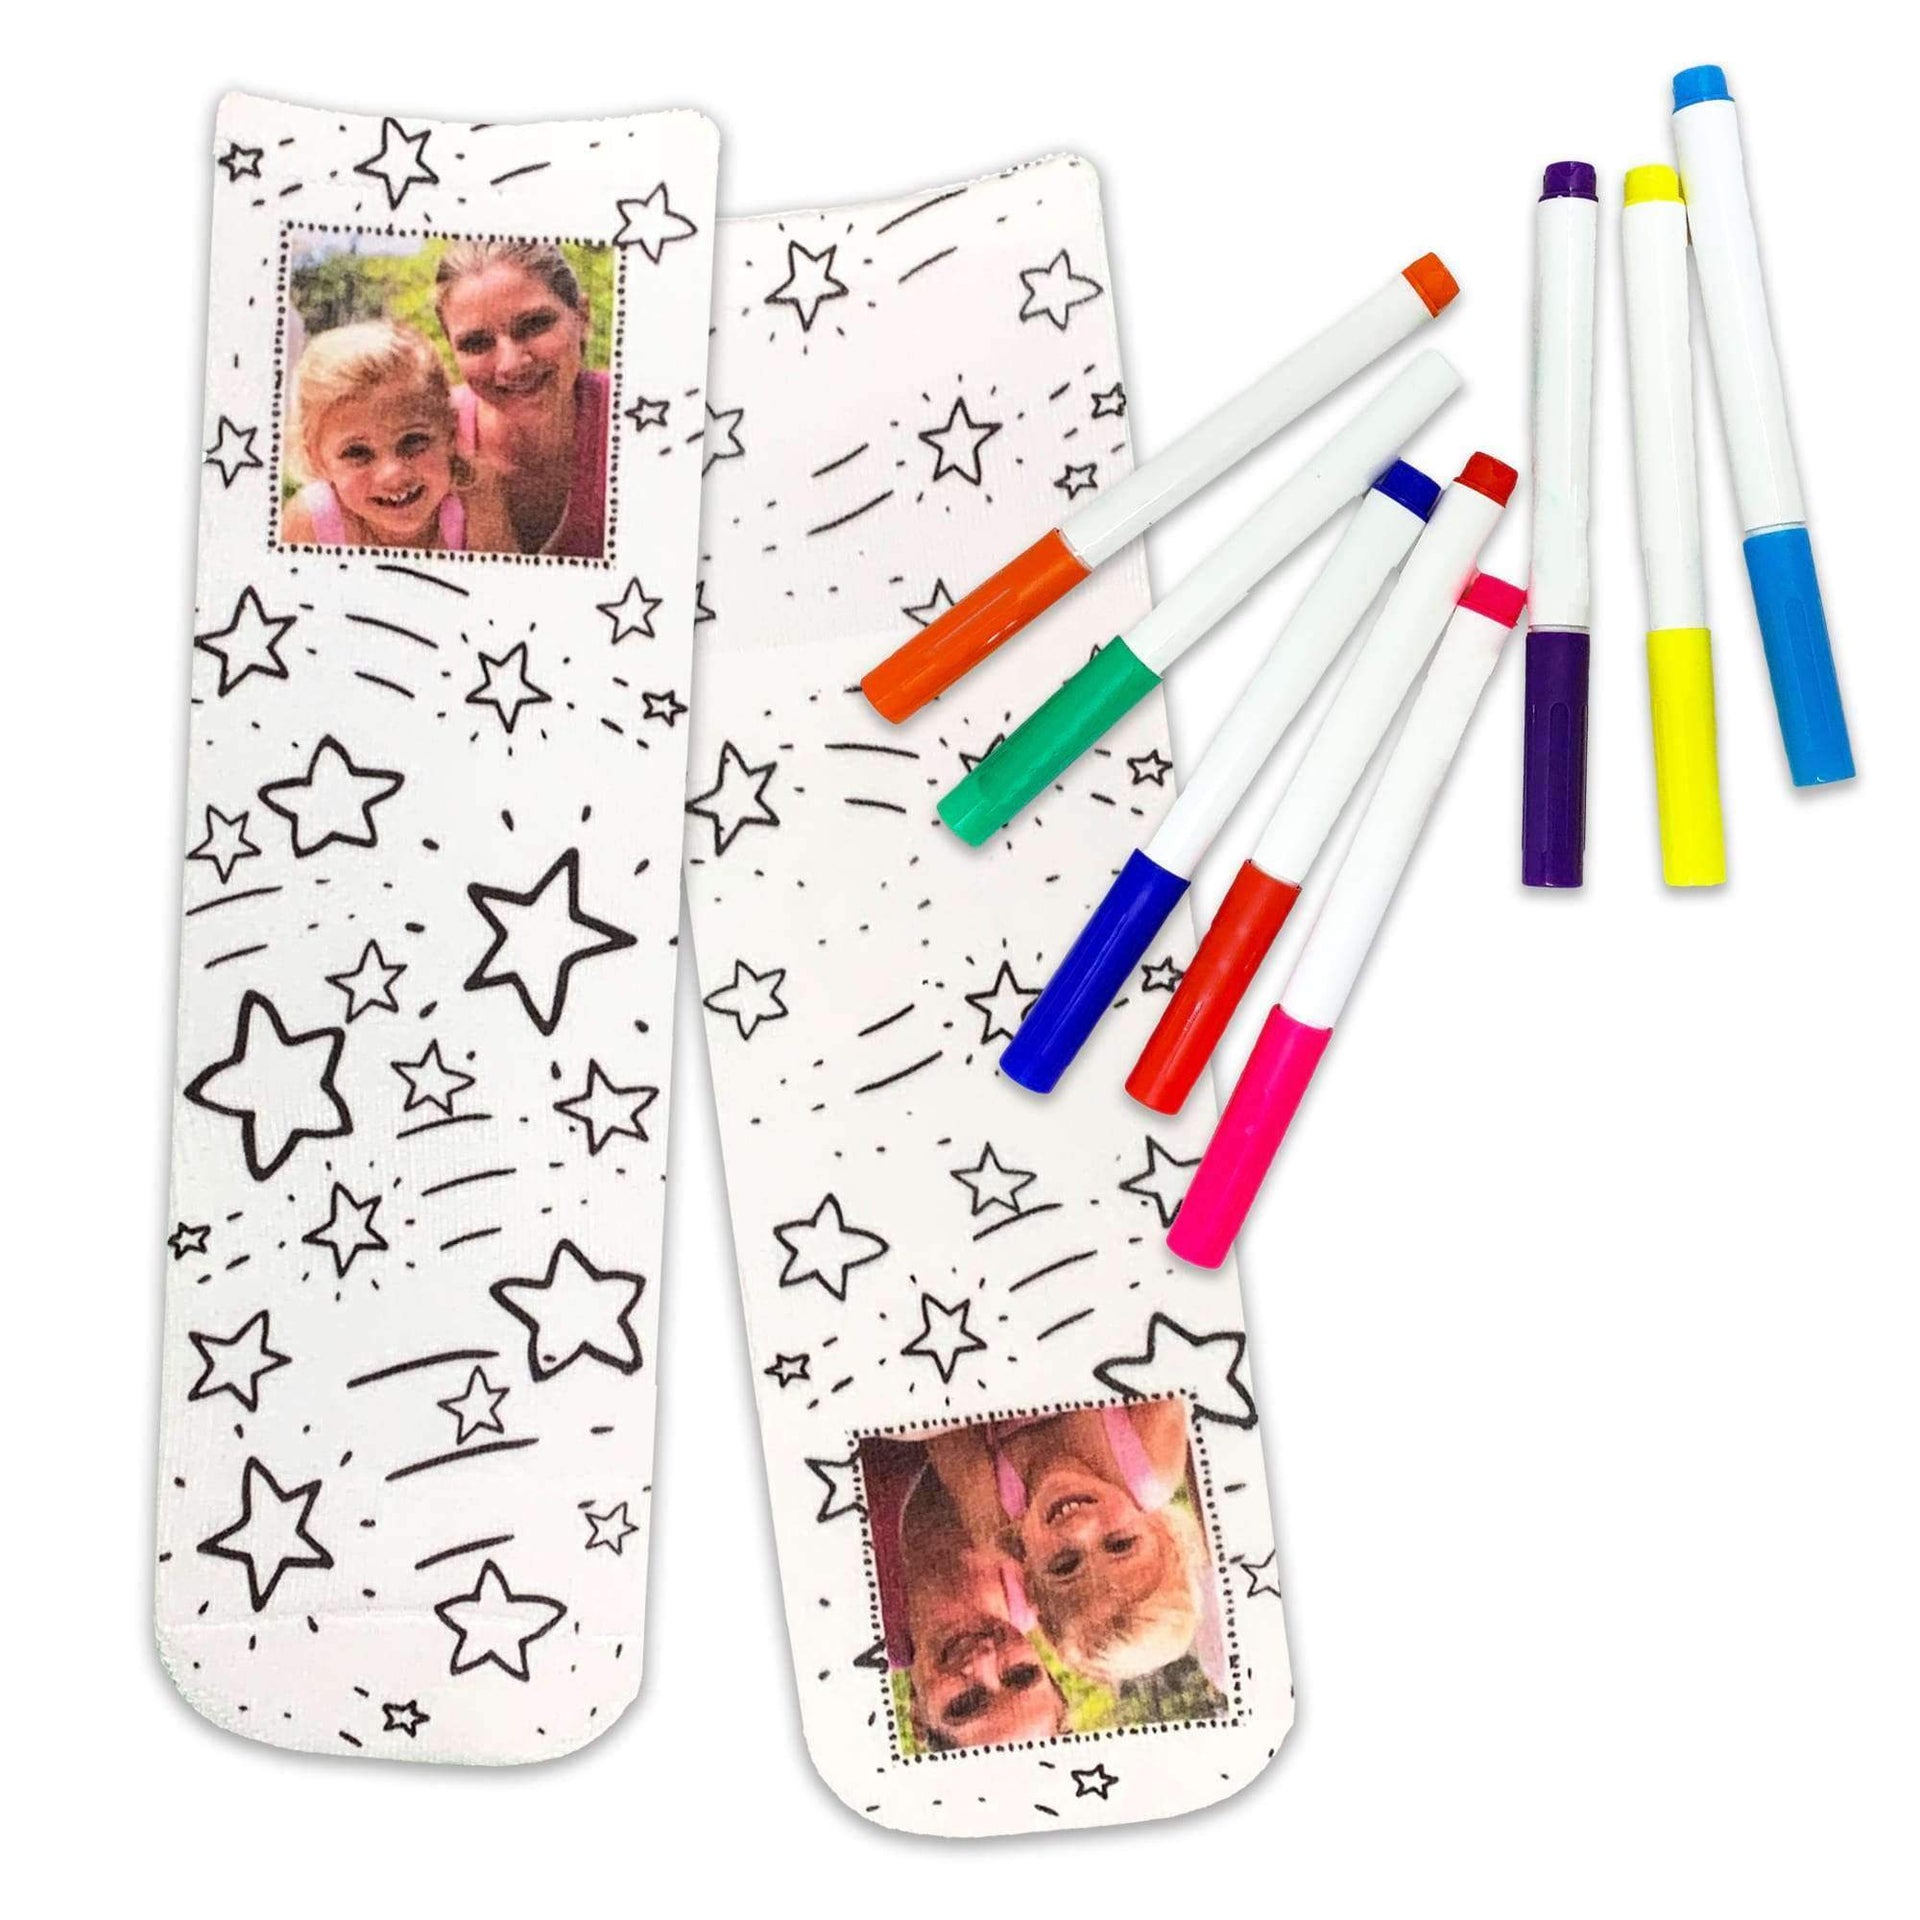 Cute coloring book style design custom printed and personalized with your own photo digitally printed on the cotton crew socks are the perfect gift for your little sister, free fabric markers included.